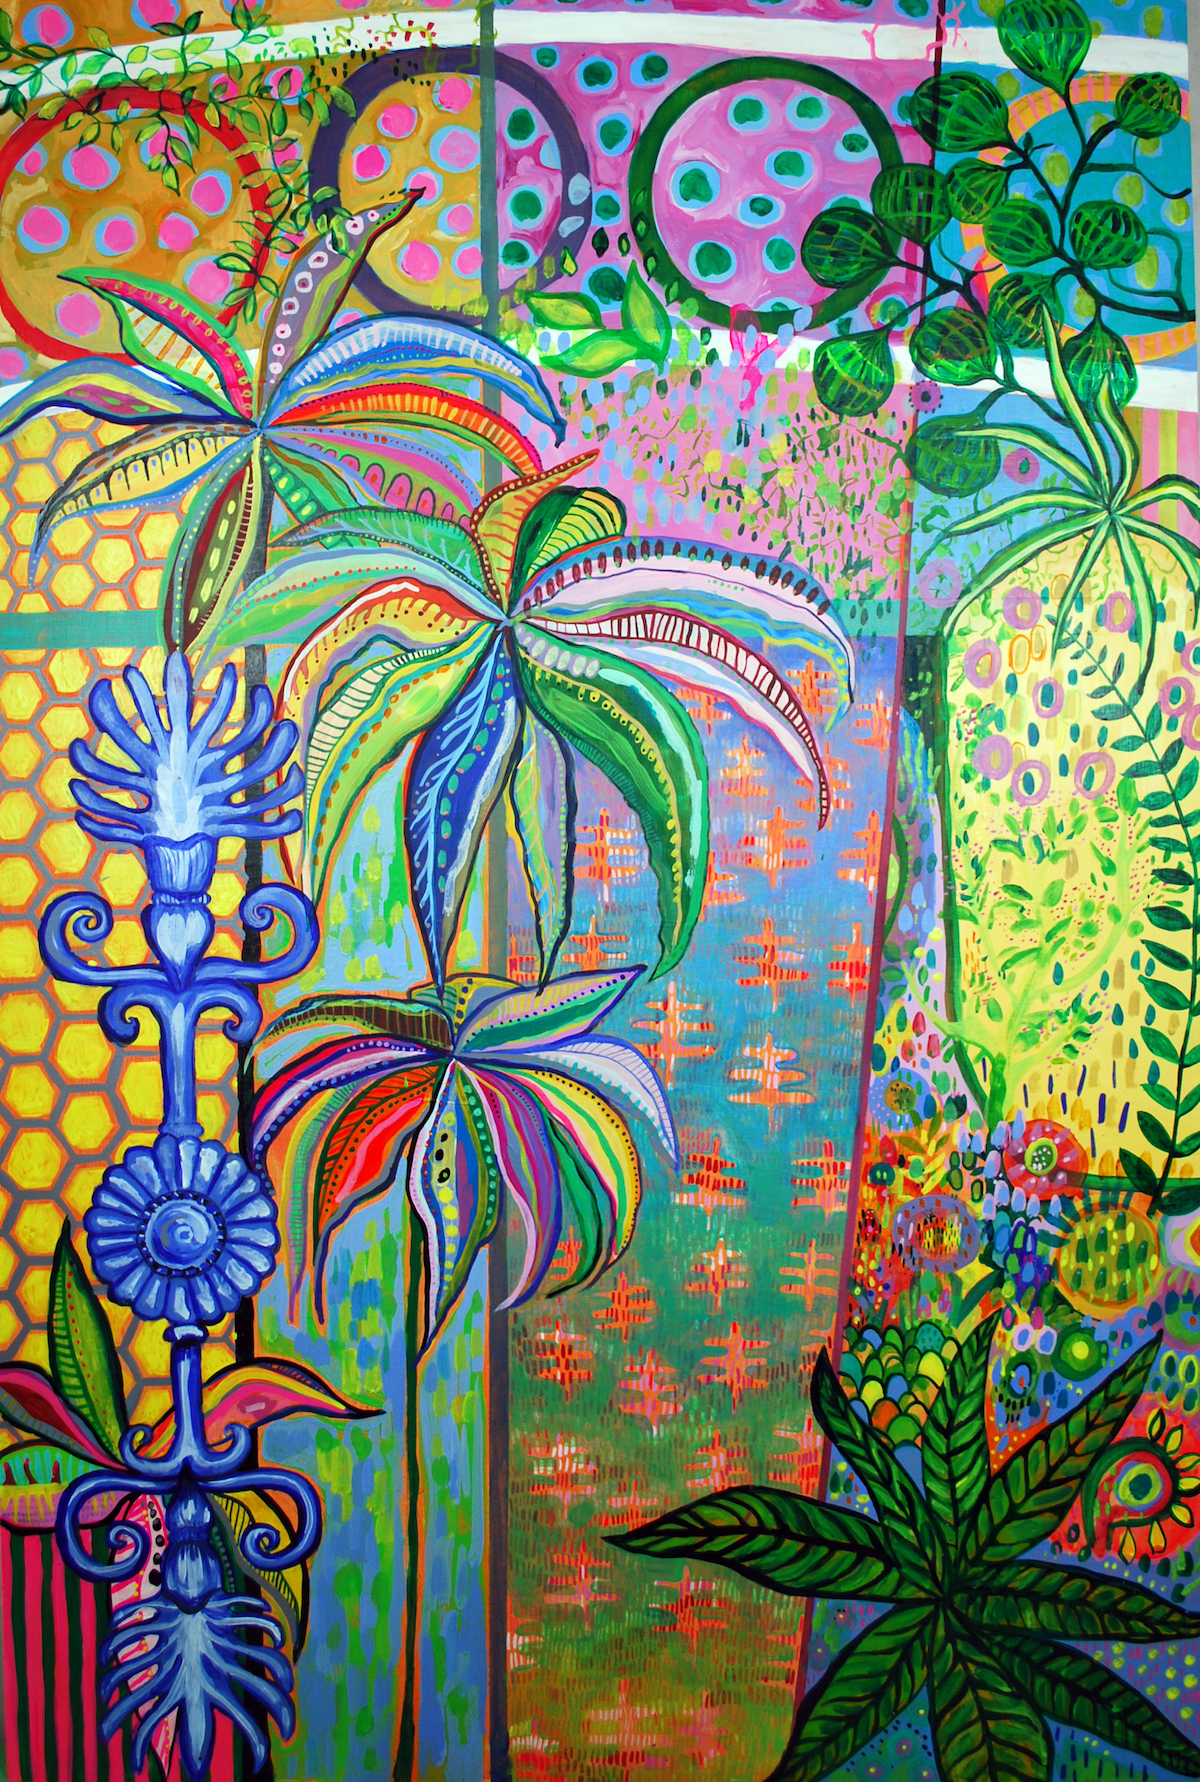 Herbaceous Hot House 2 (49.5 H x 33.3 W x 2 in) Acylic on wood panel .jpg